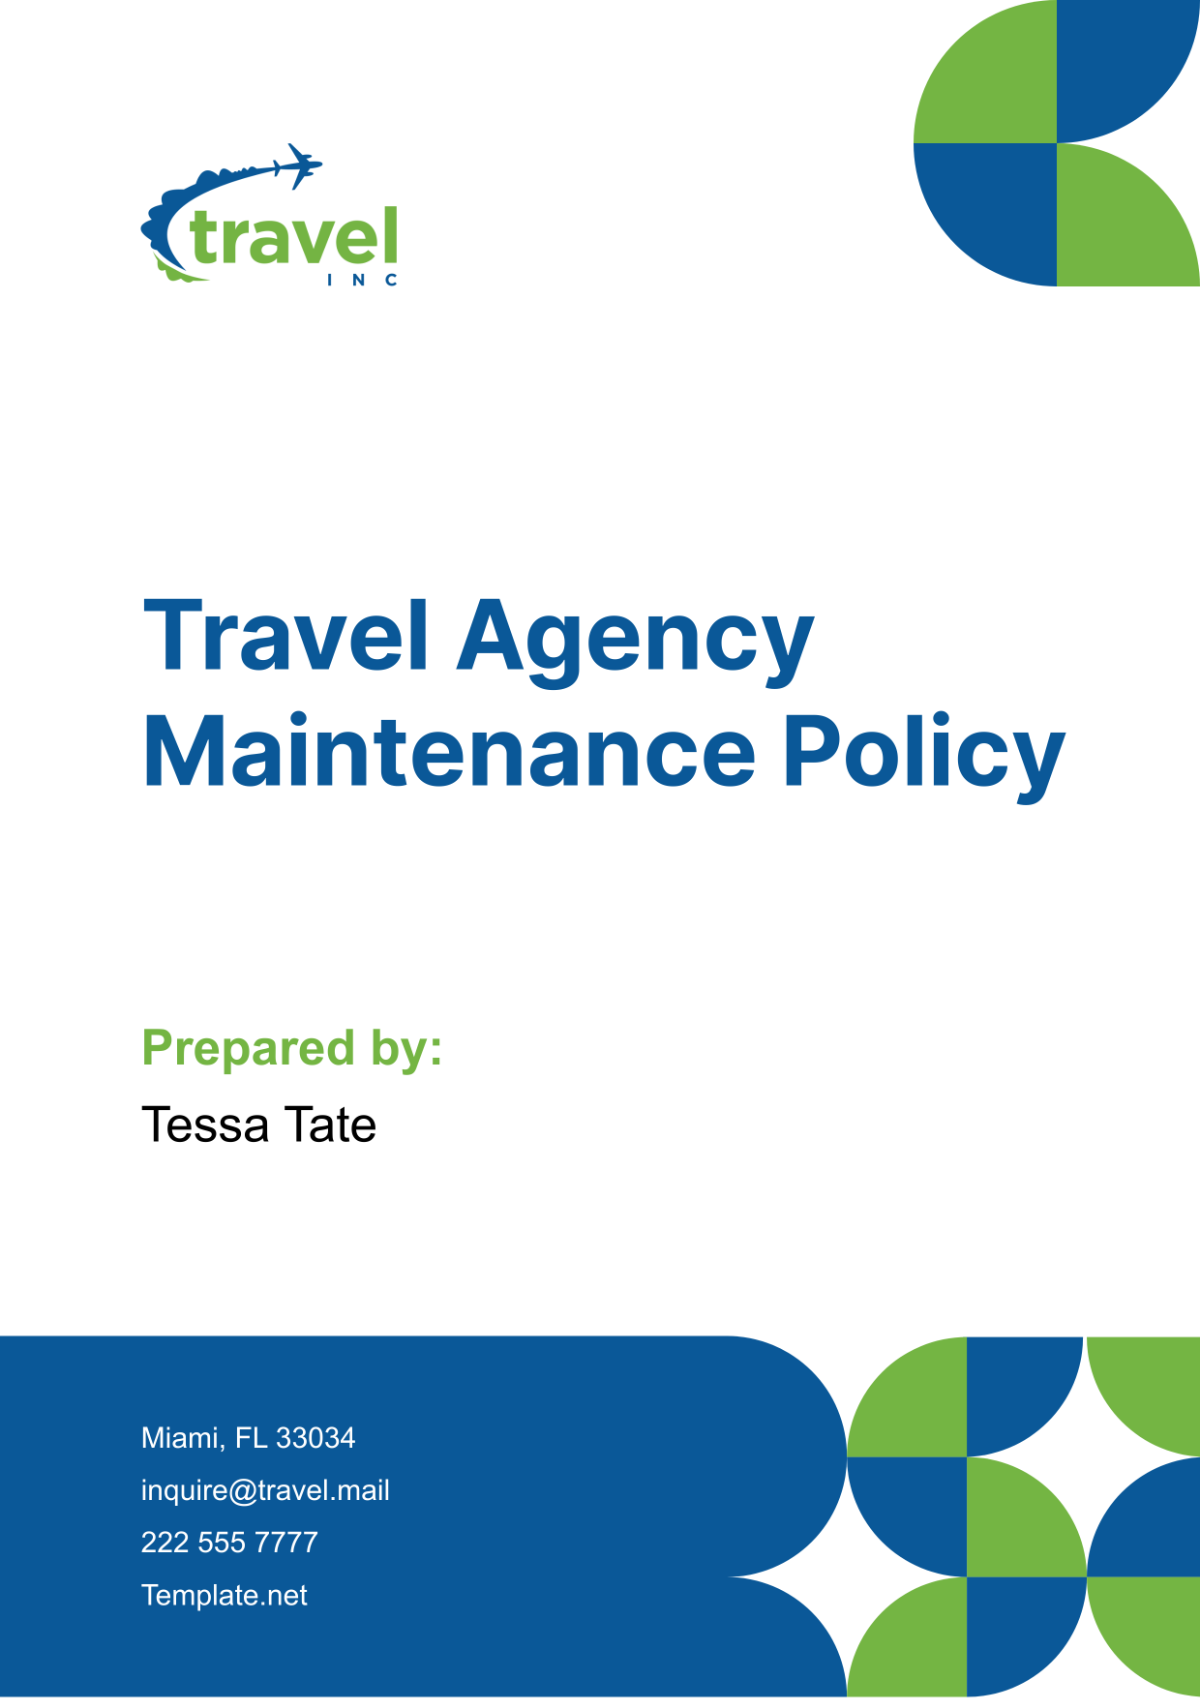 Travel Agency Maintenance Policy Template